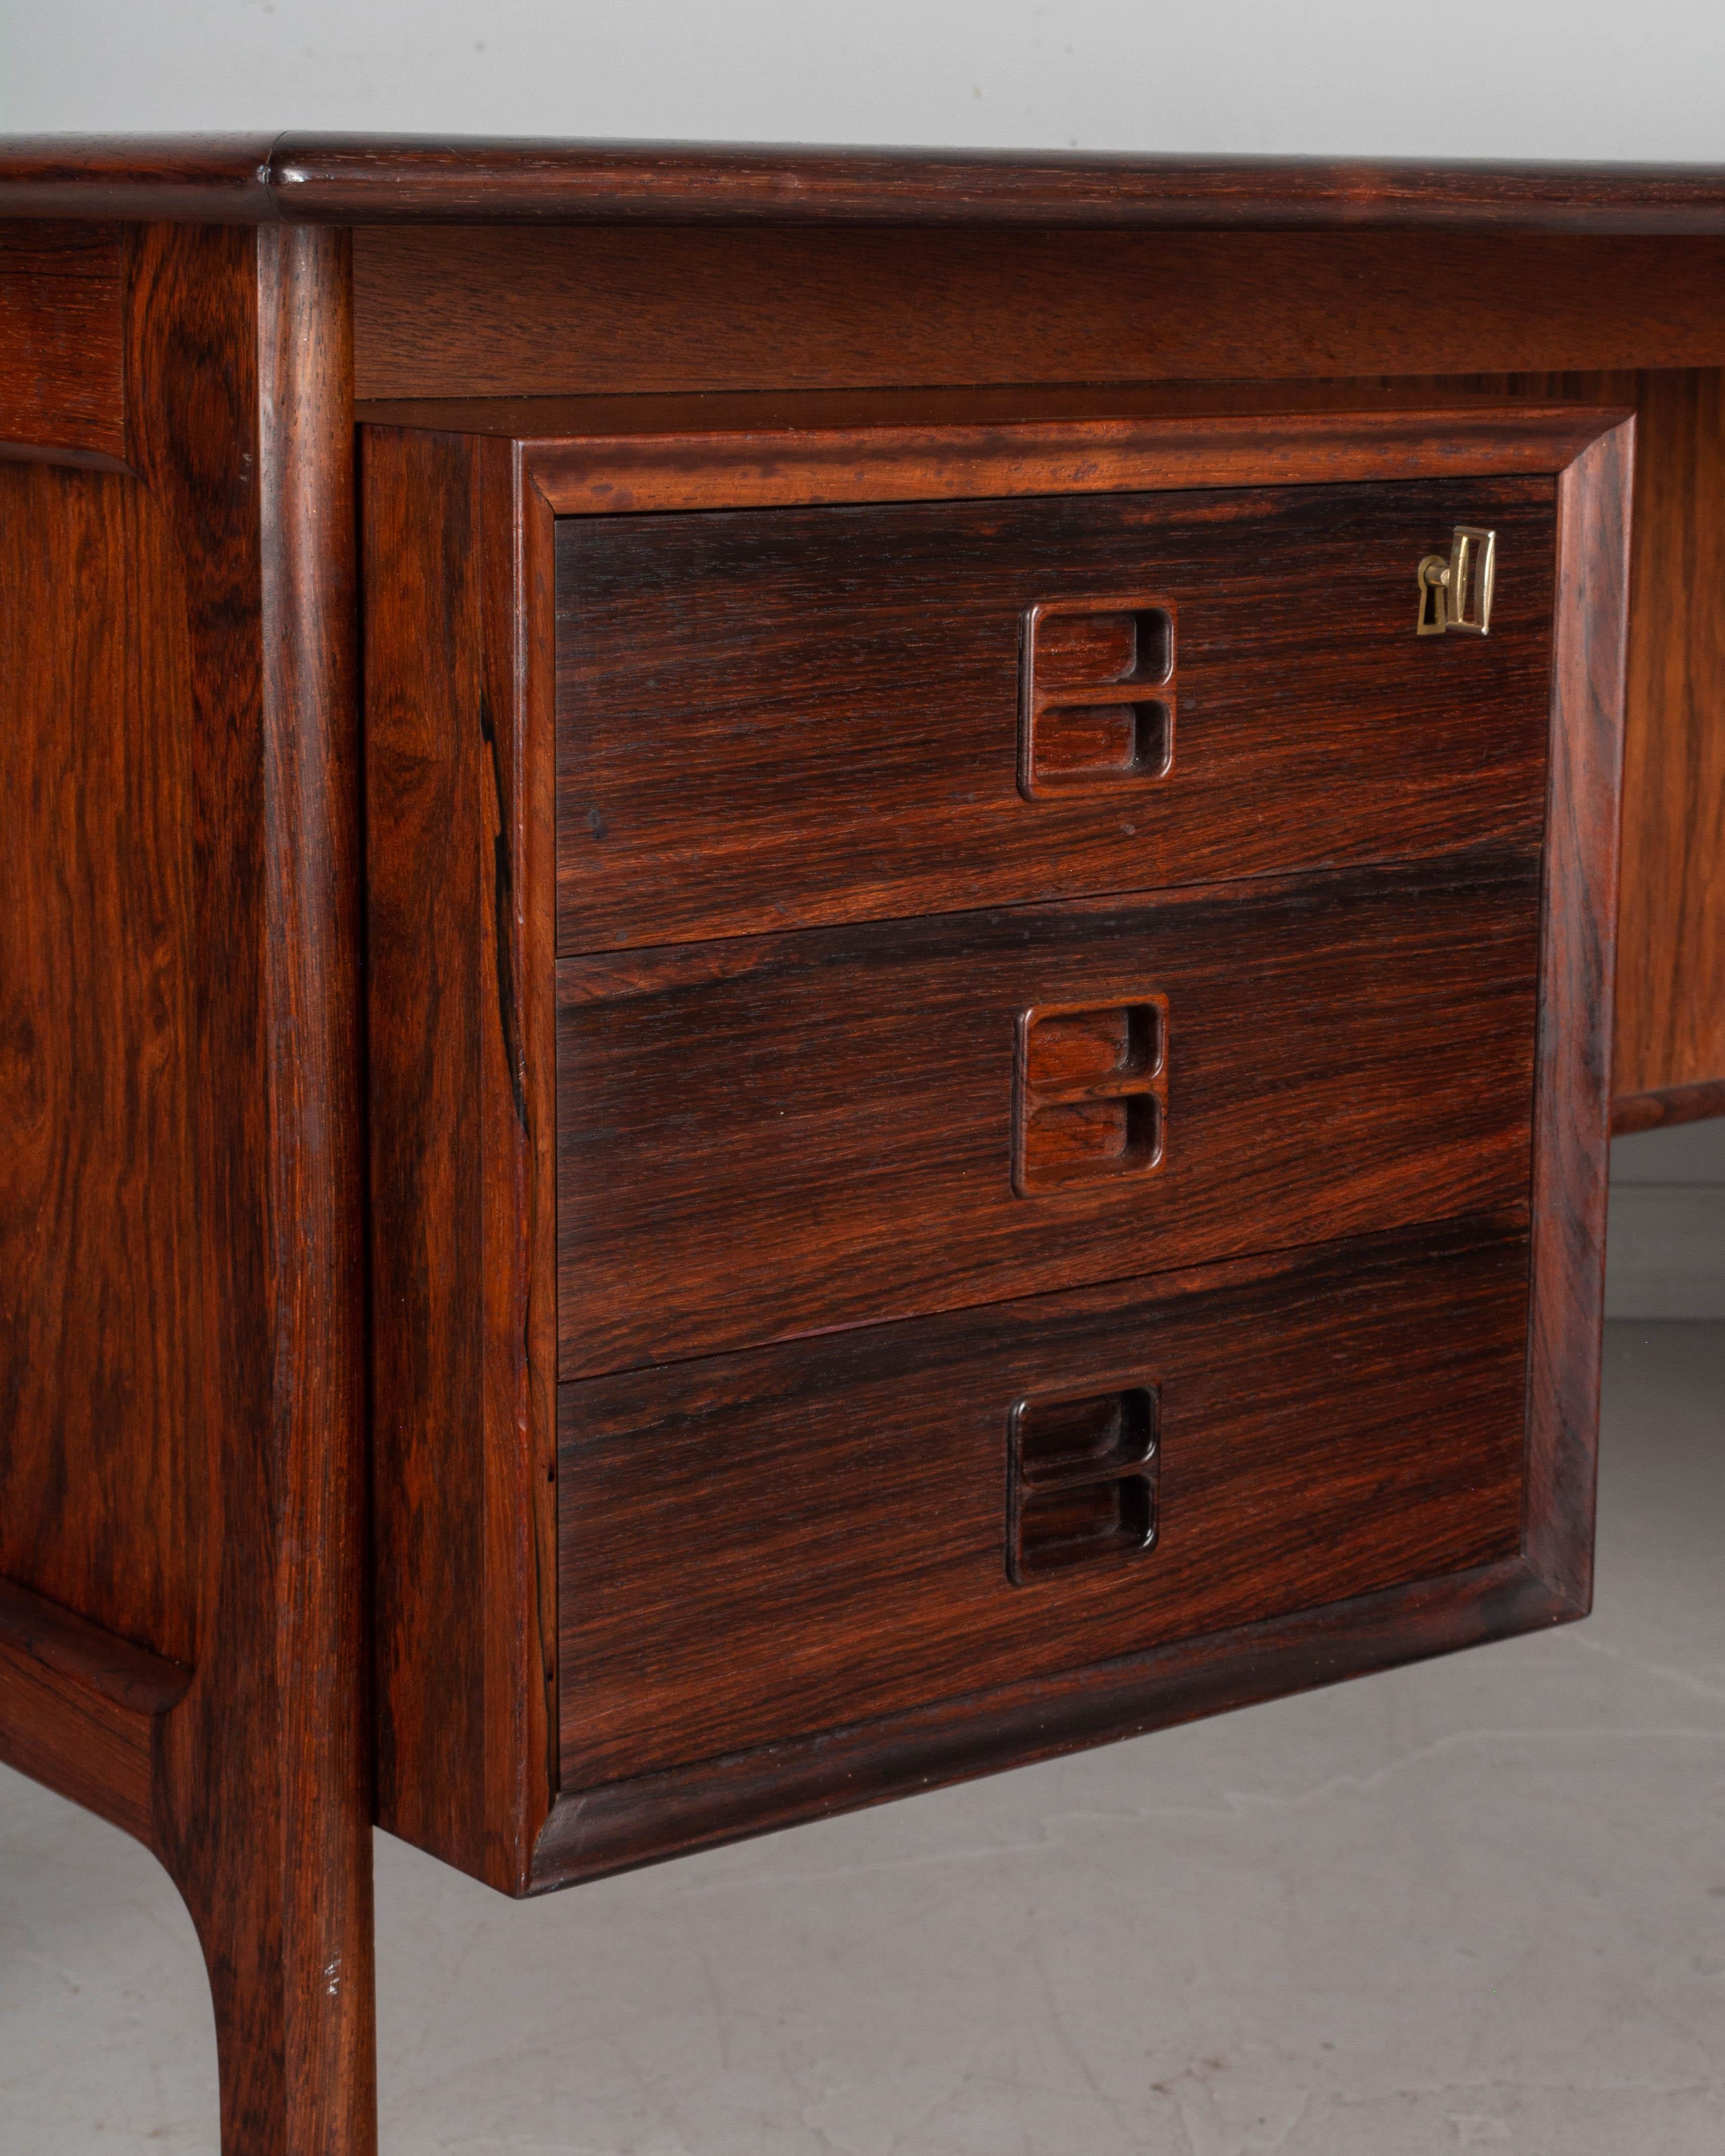 A midcentury Danish modern rosewood executive desk by master craftsman, architect and designer Arne Vodder. Three dovetailed drawers with inset handles and working locks with two brass keys. Three bookshelf compartments on the back. Large work